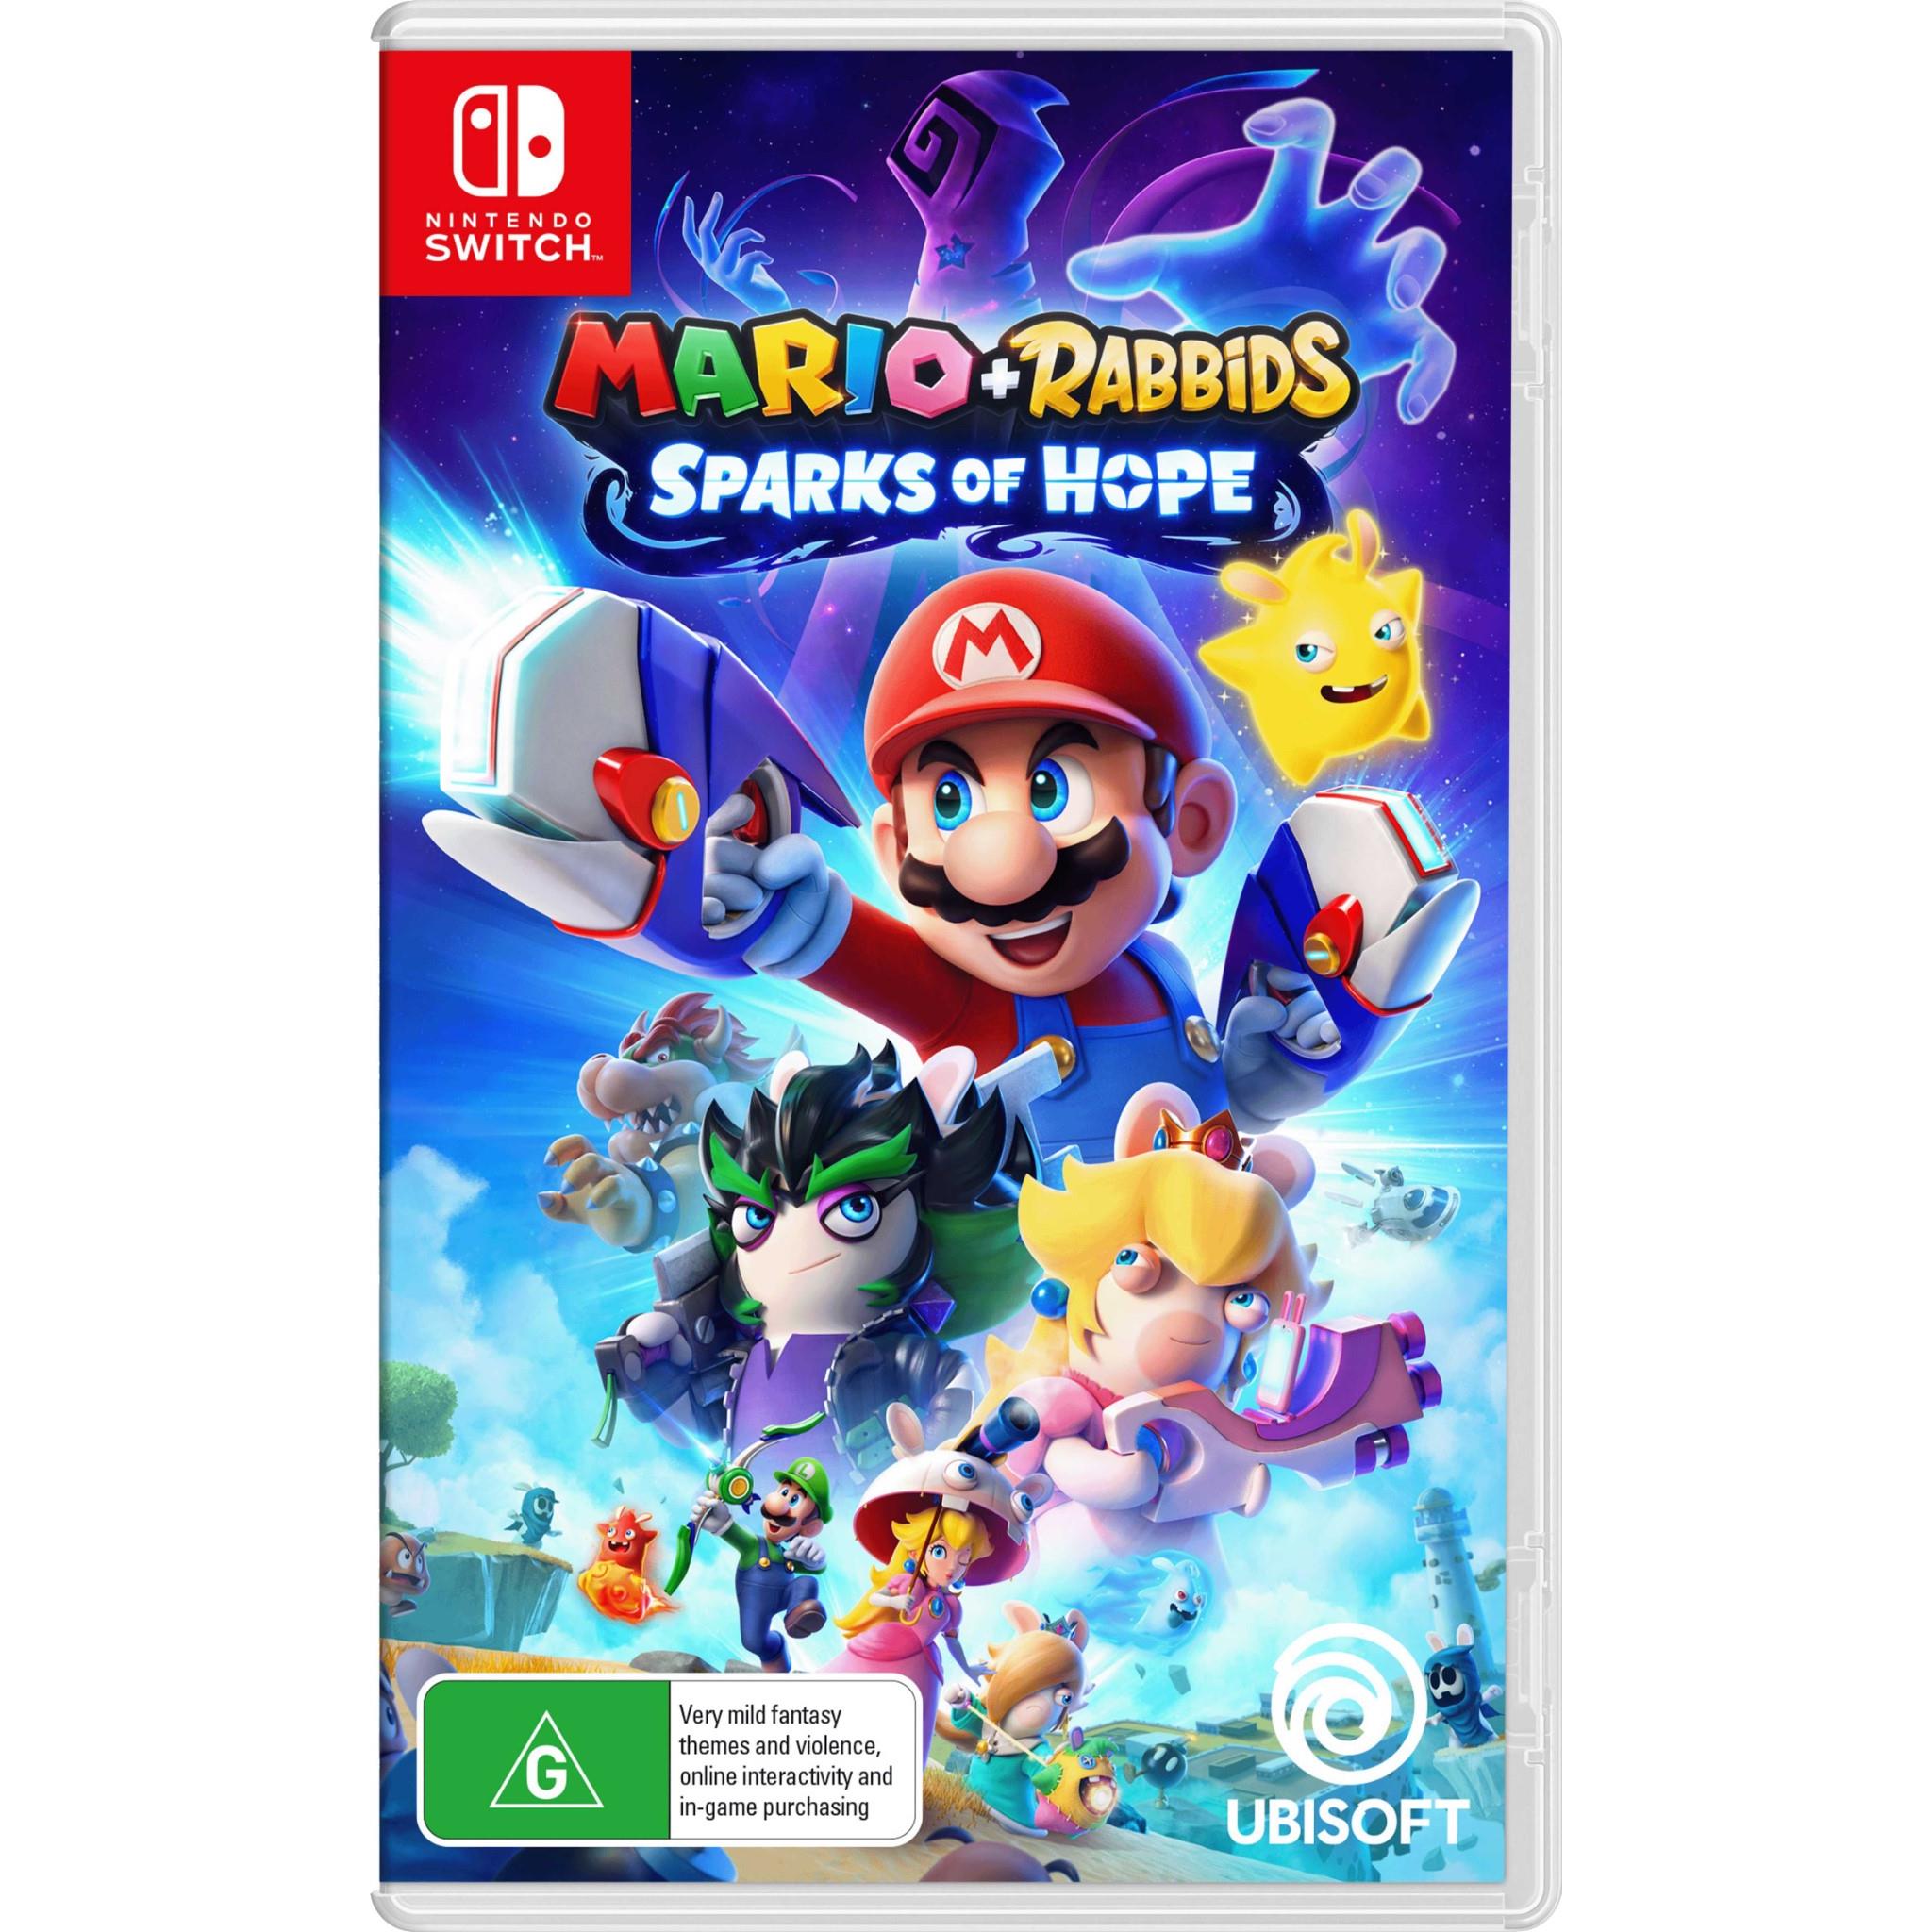 mario + rabbids sparks of hope